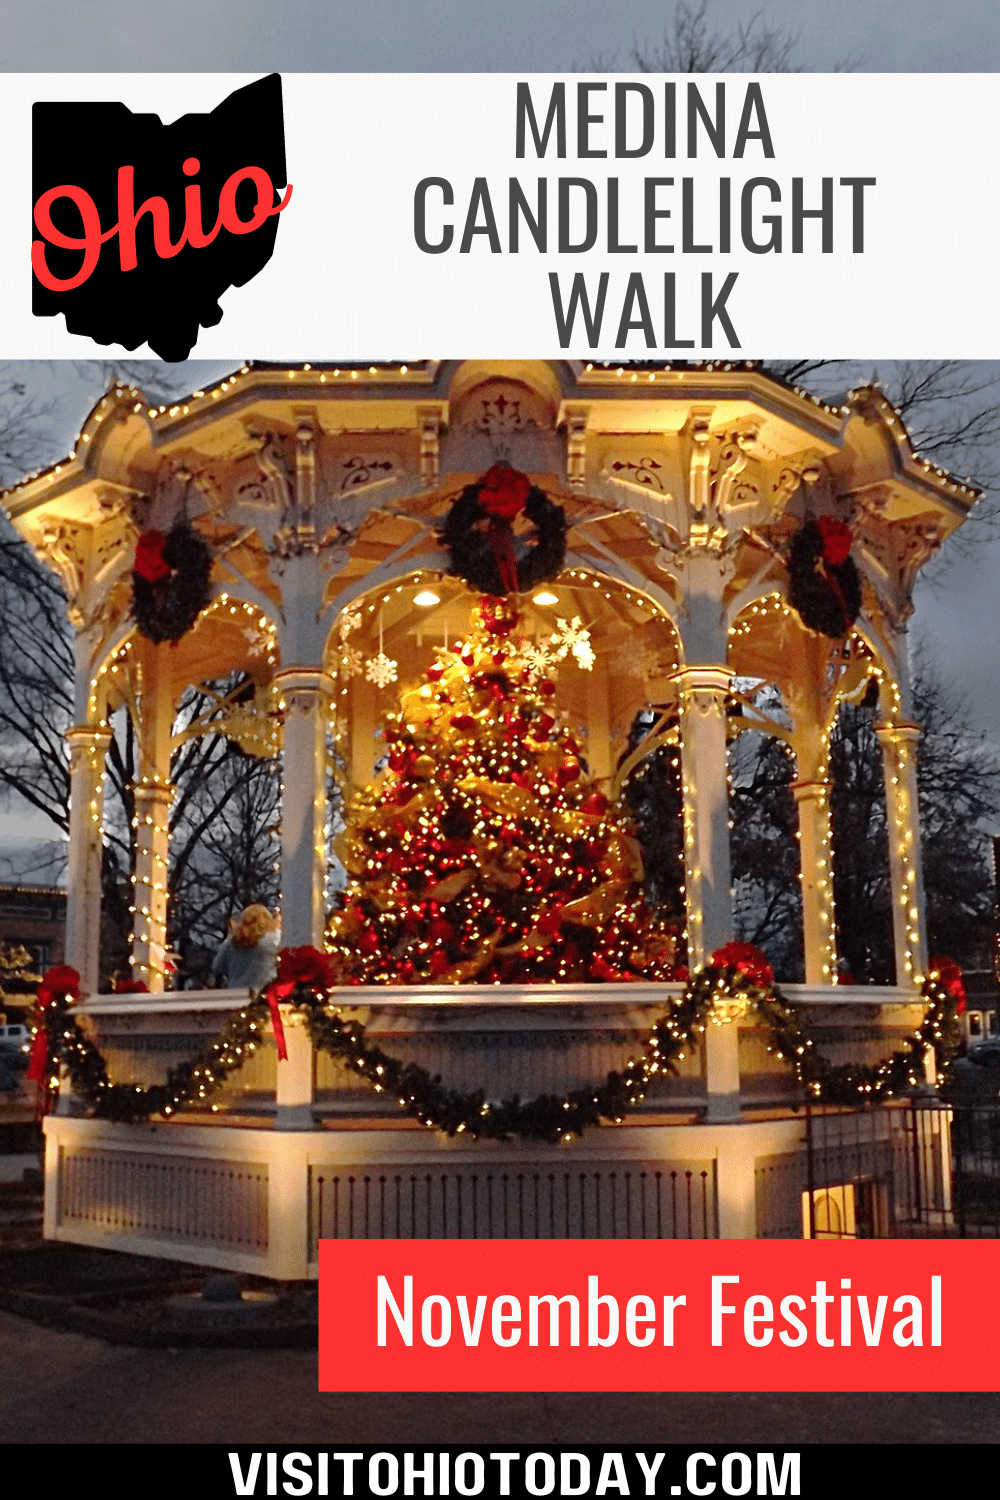 The Medina Candlelight Walk is a three-day event held in November. Historic Medina comes to life with Christmas lights and festive decorations for this weekend.